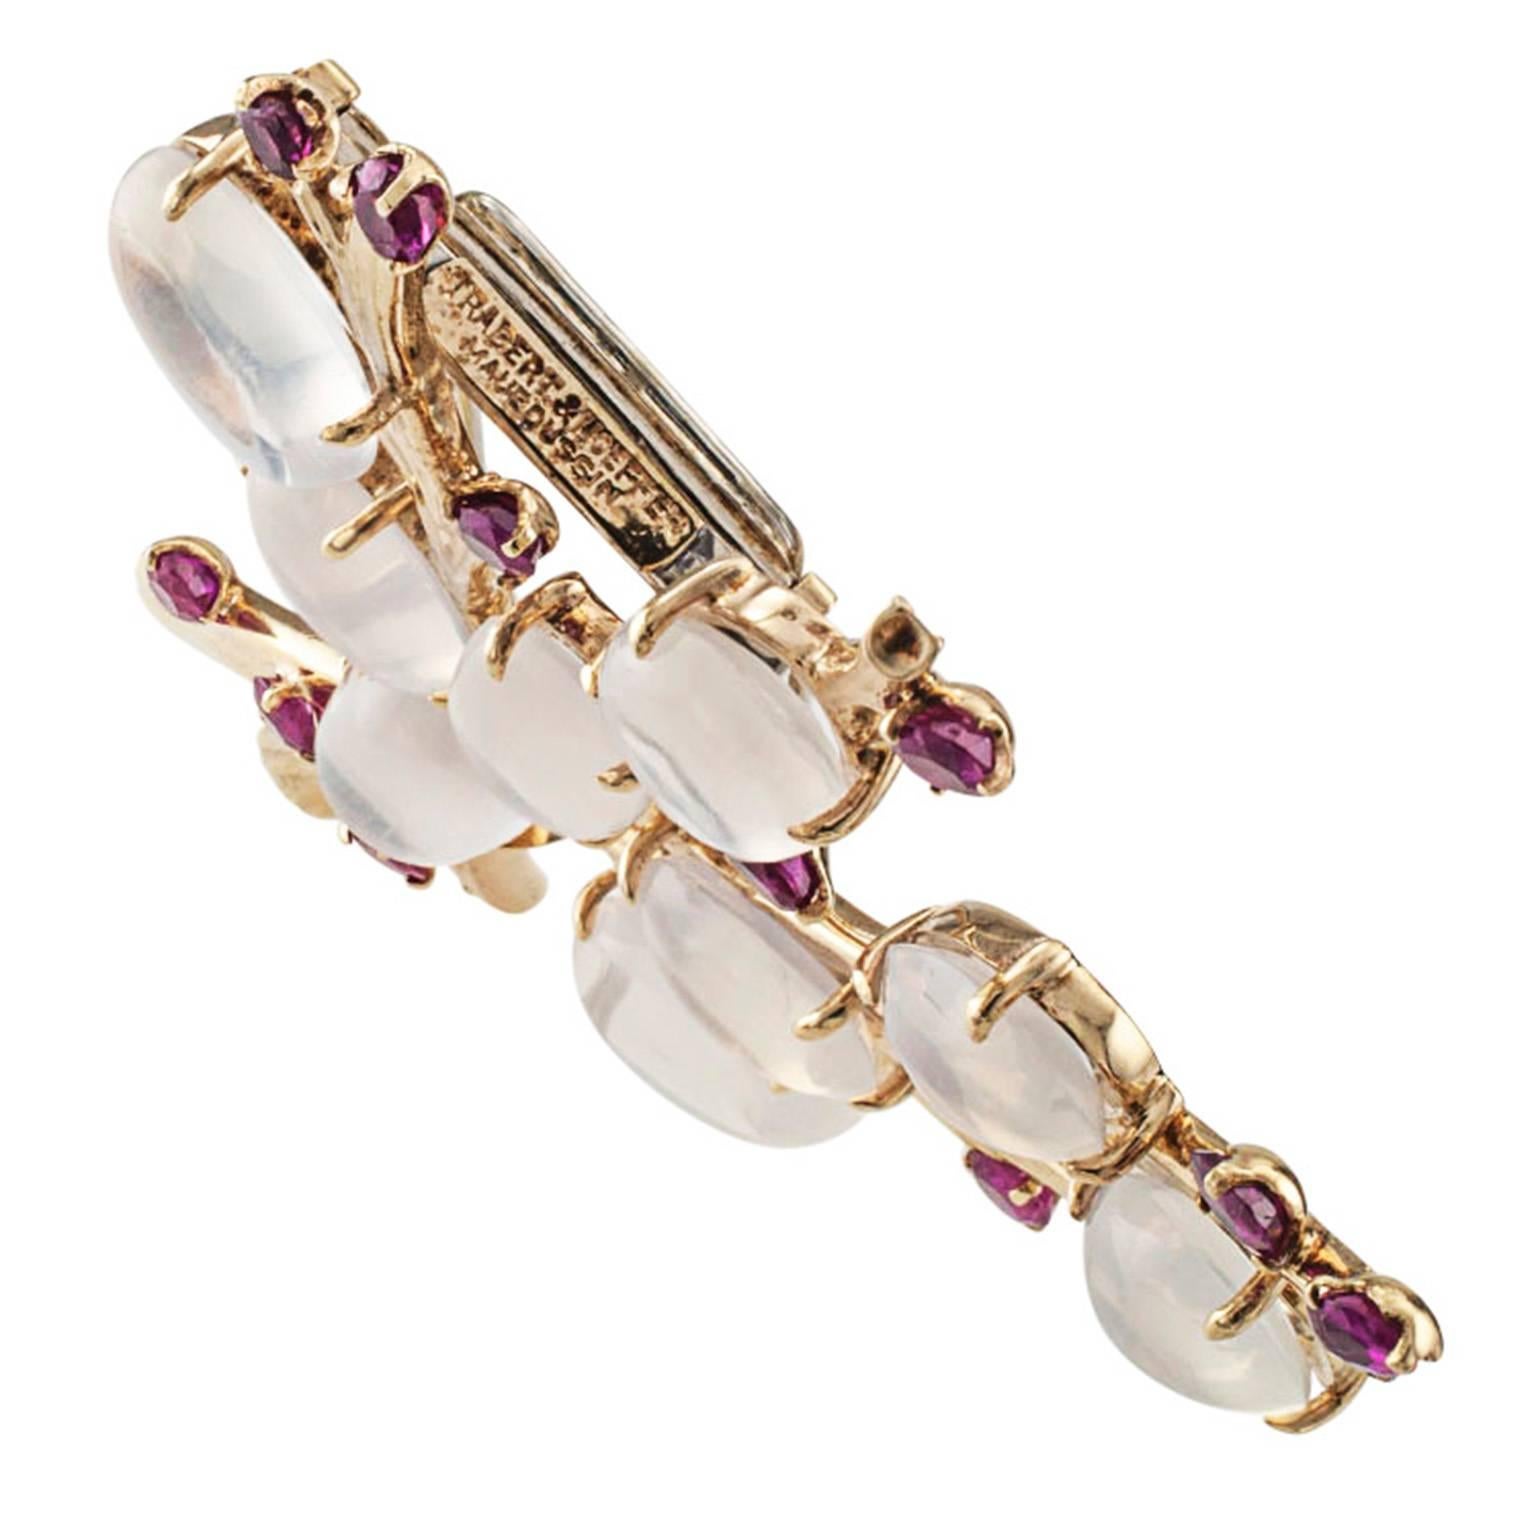 Trabert and Hoeffer Mauboussin Retro Brooch

   A romantic retro composition suggesting pussy willow branches realized via a clever arrangement of moonstones and rubies in 14 karat yellow gold, all gathered with a diamond ribbon.  From the